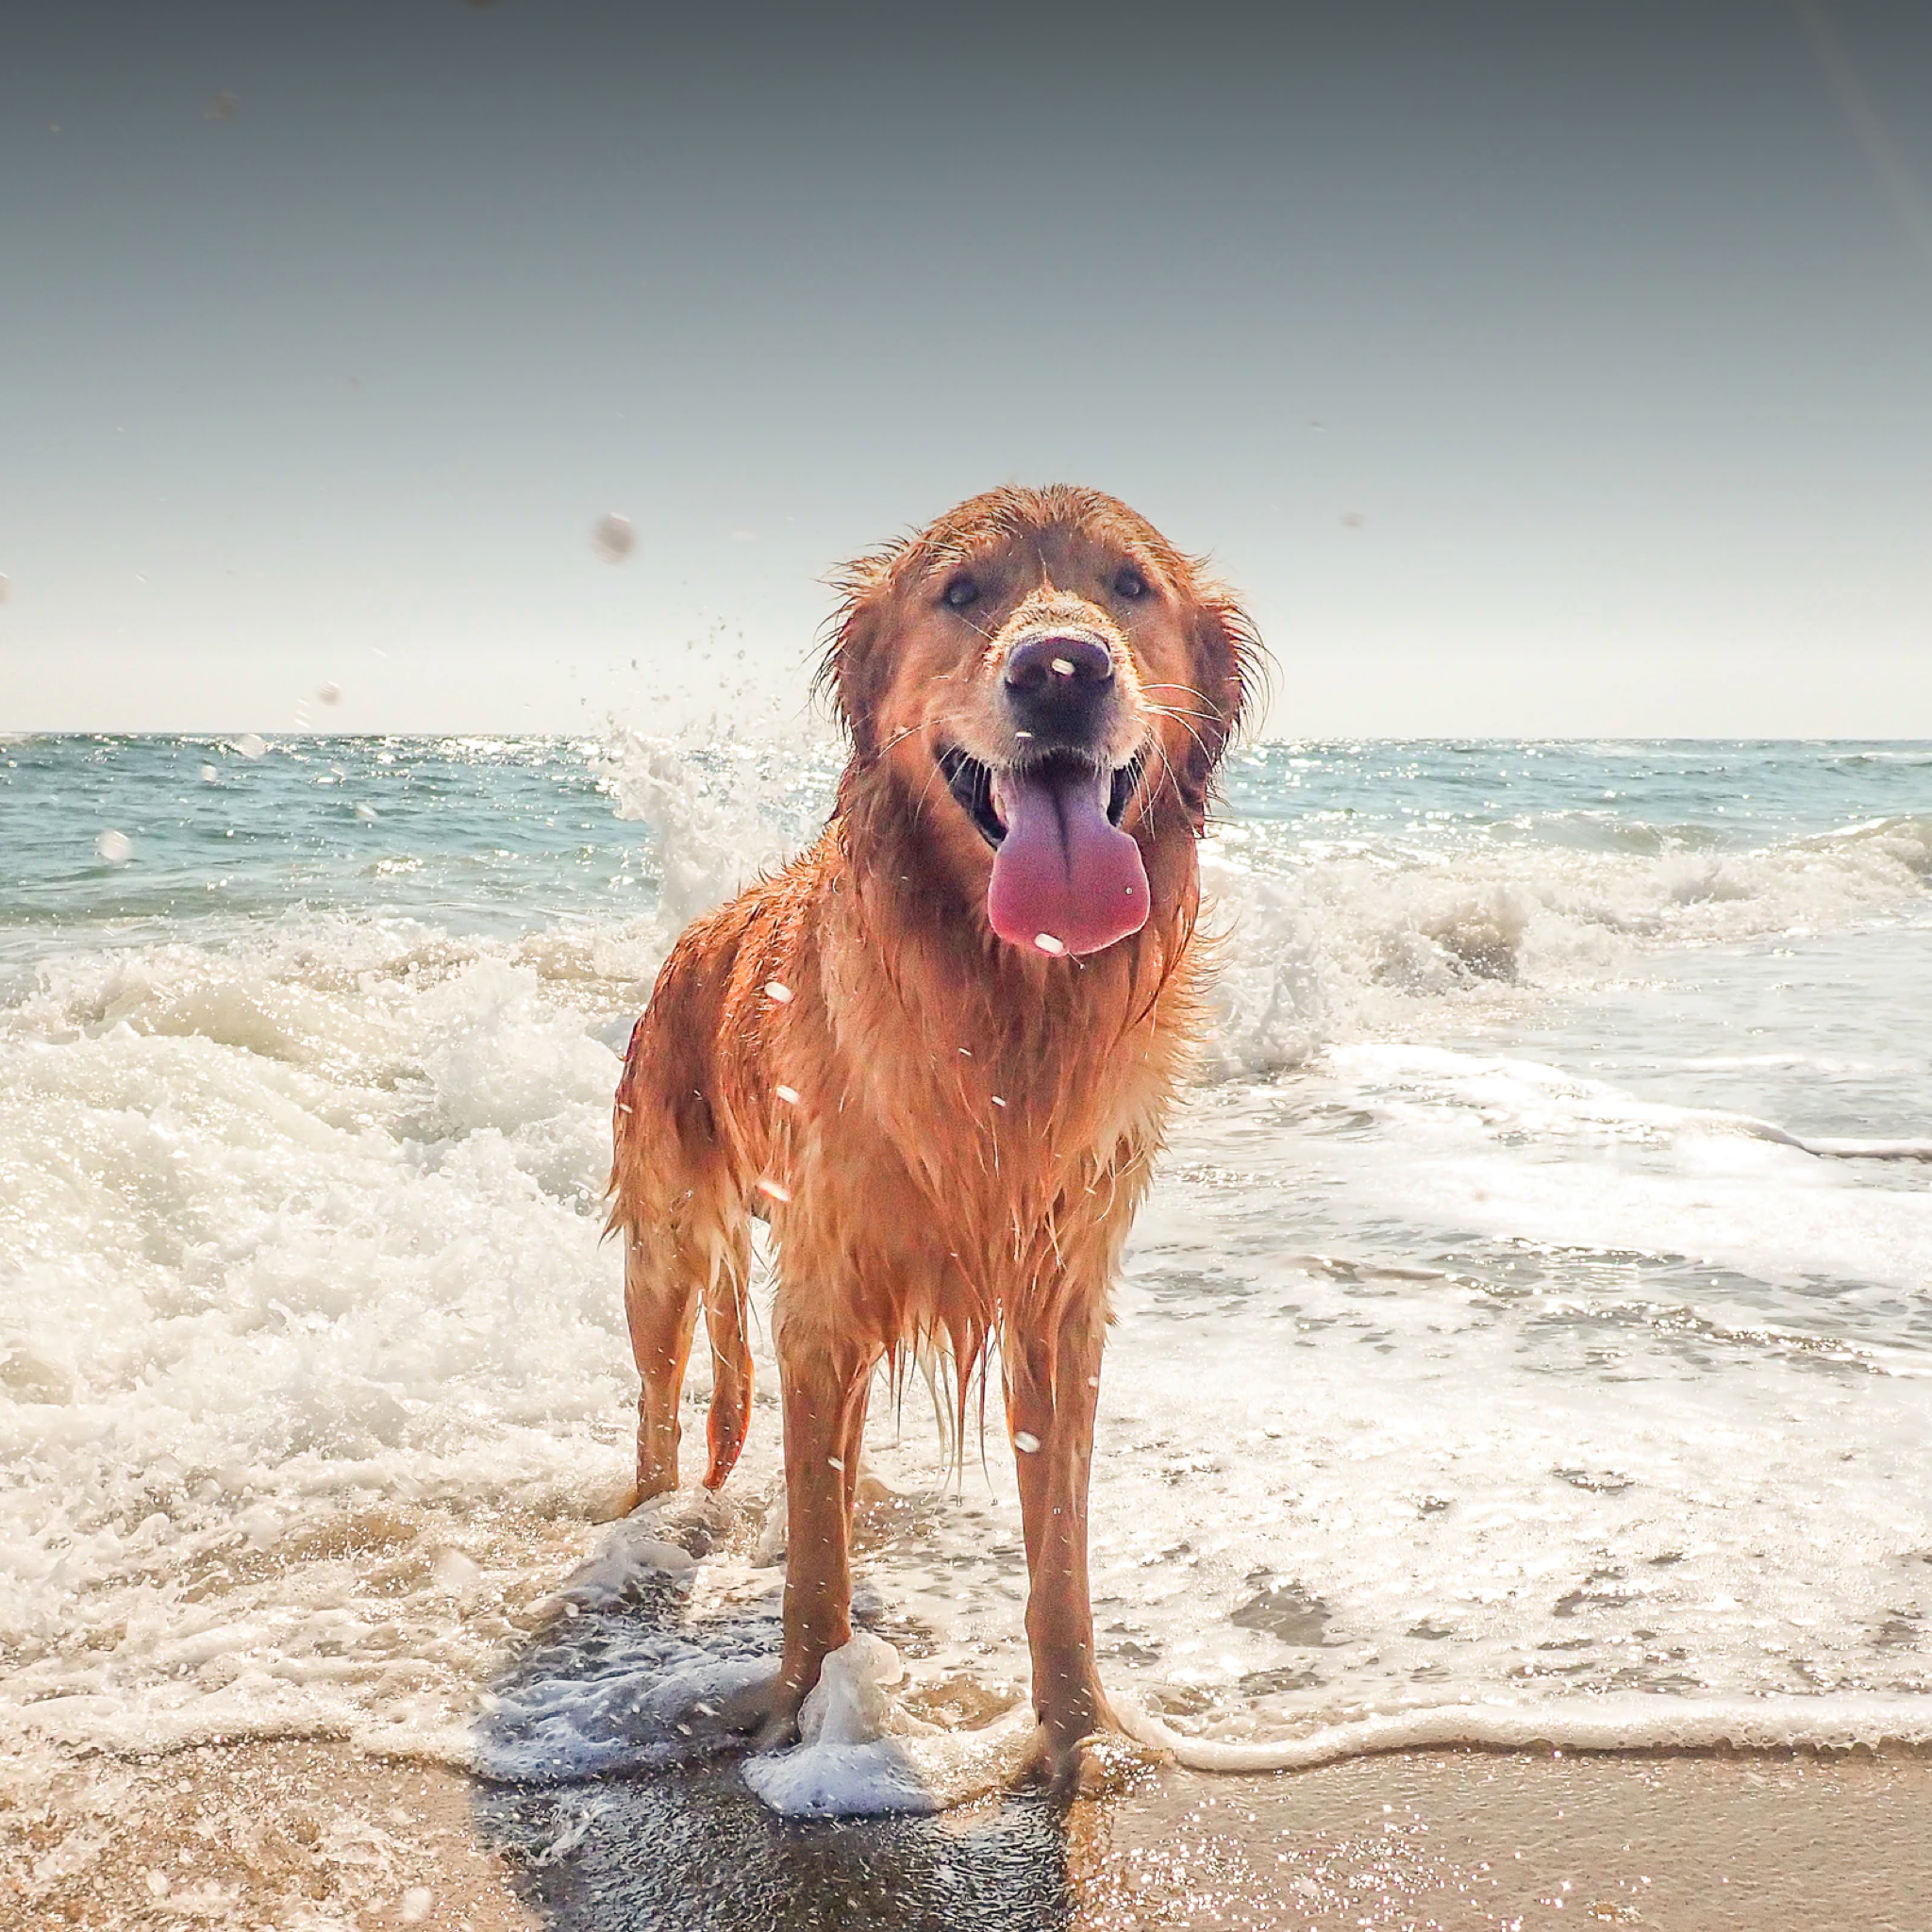 A happy dog smiles with its tongue out as the ocean water washes over its paws